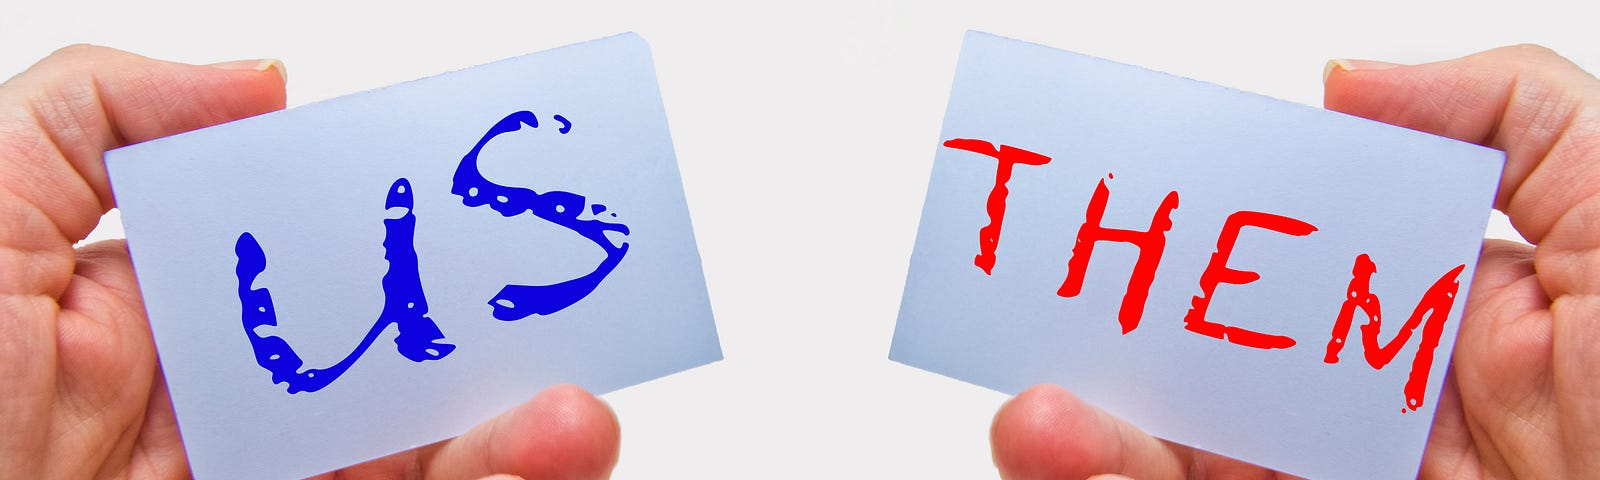 An image of two hands holding signs reading “us” in blue and “them” in red. “Us” is on the left. “Them” are on the right.